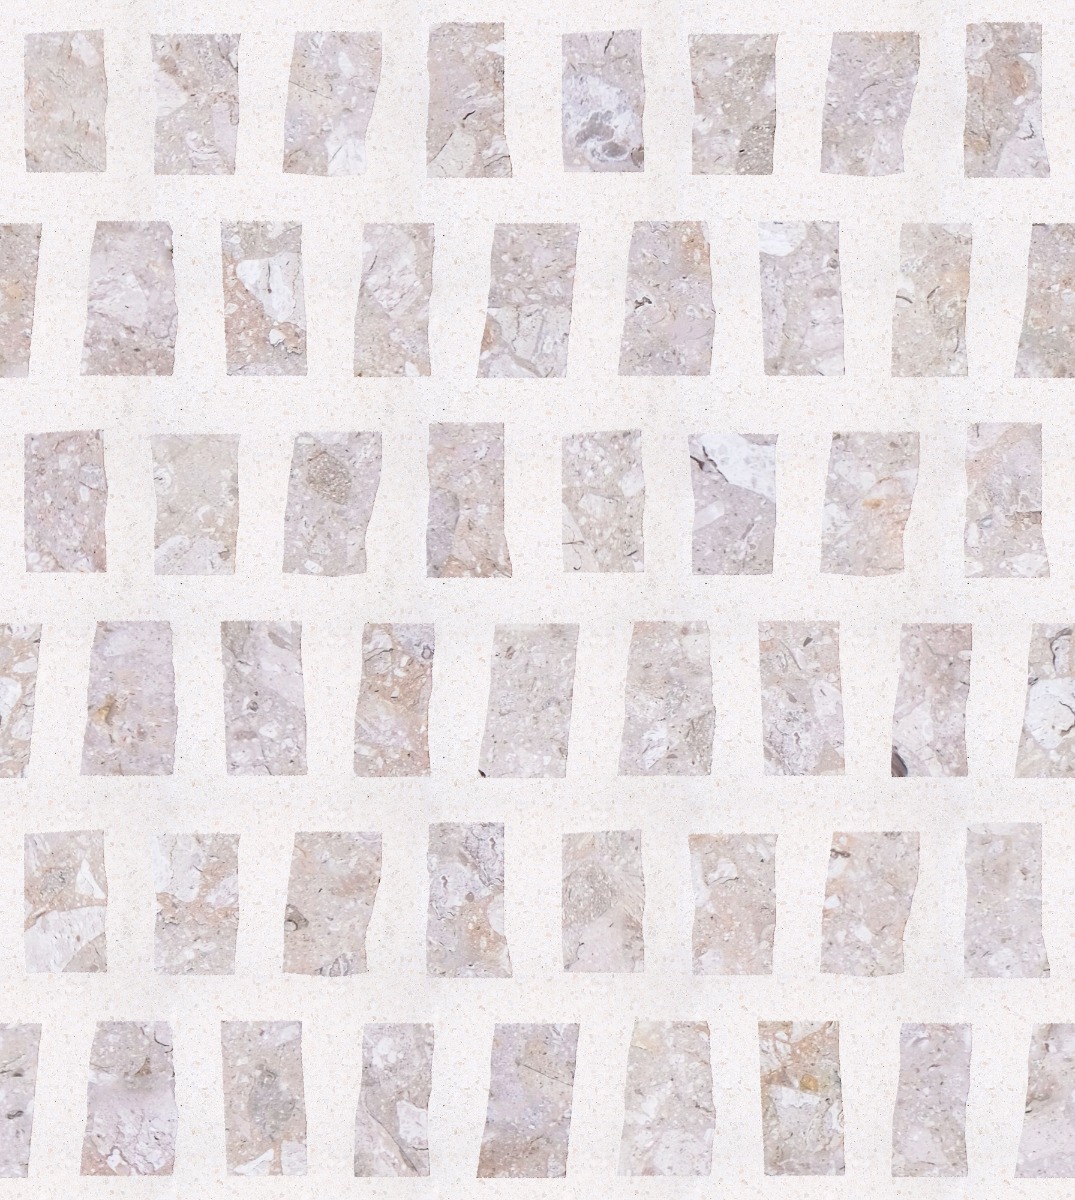 A seamless terrazzo texture with sabbia terrazzo units arranged in a Scarpa pattern